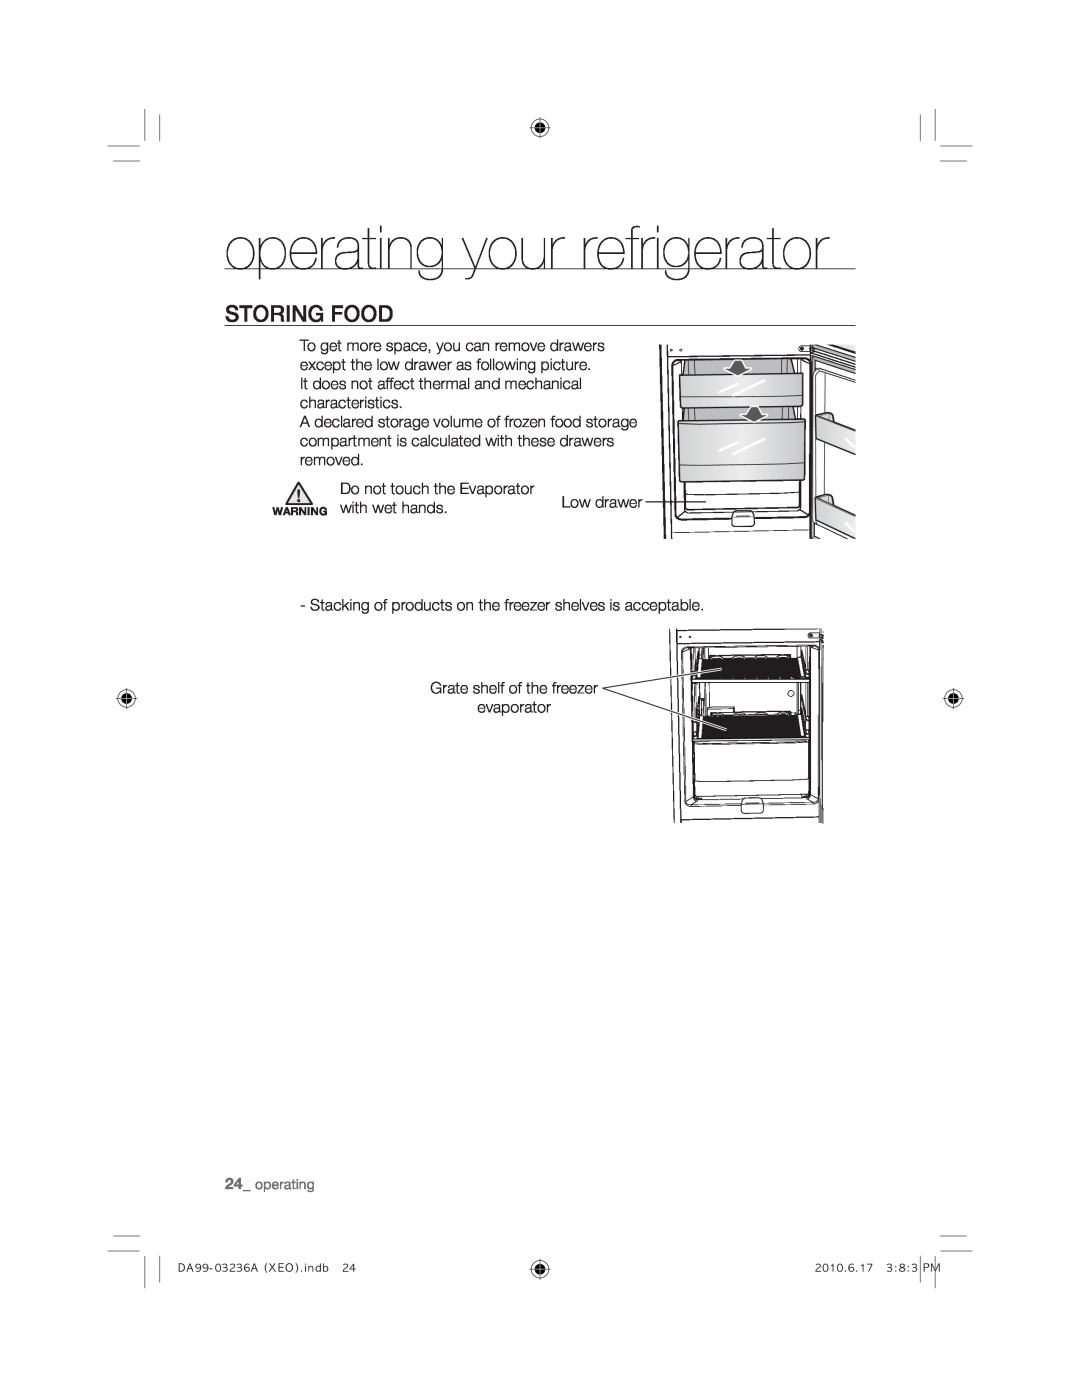 Samsung RL43TGCIH1/XEF, RL39TRCSW1/XEF manual operating your refrigerator, Storing Food, Do not touch the Evaporator 